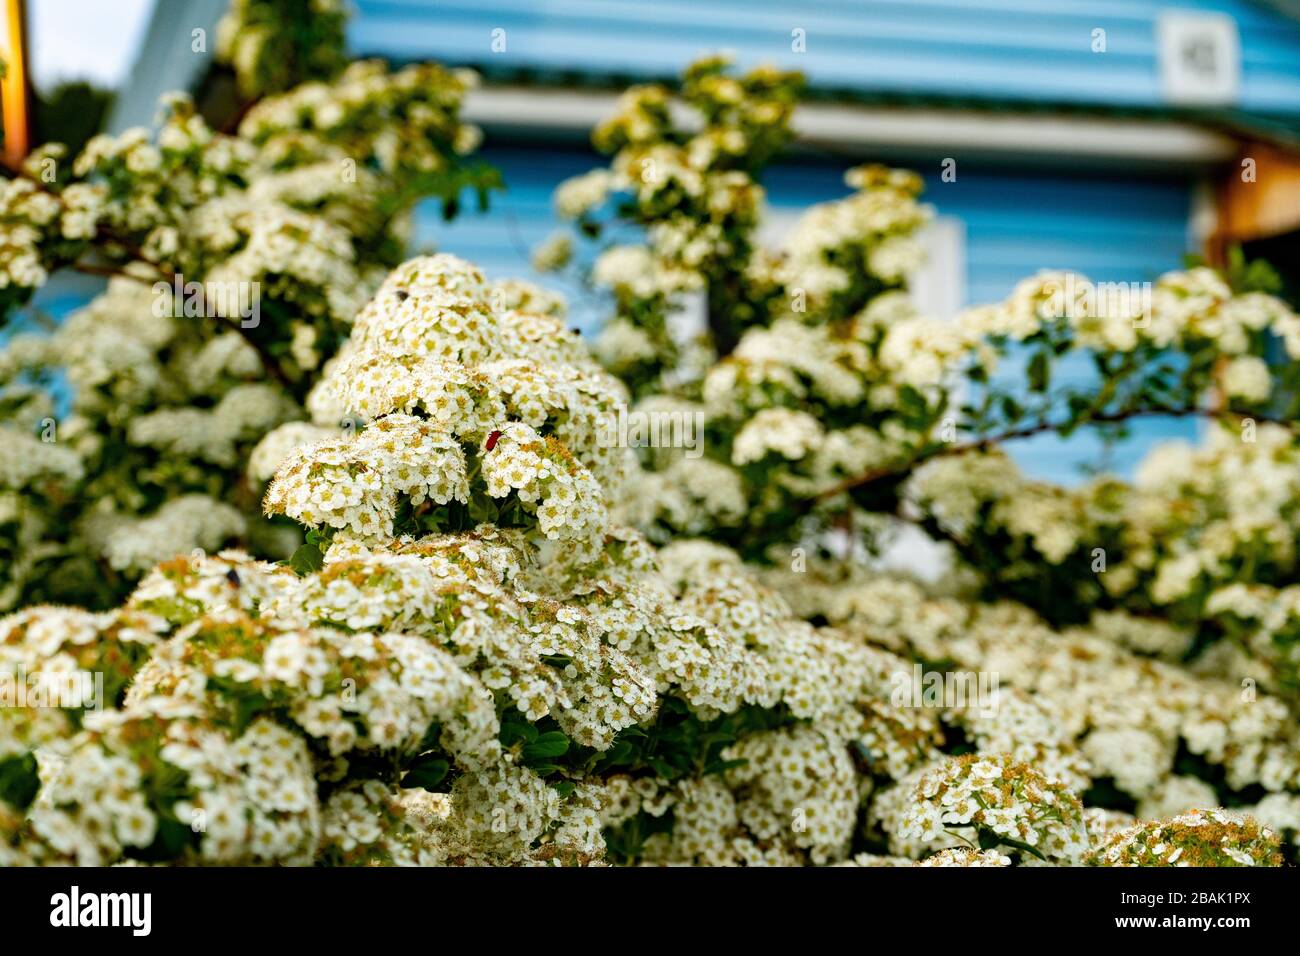 Blooming spirea or meadowsweet. Branches with white flowers Stock Photo